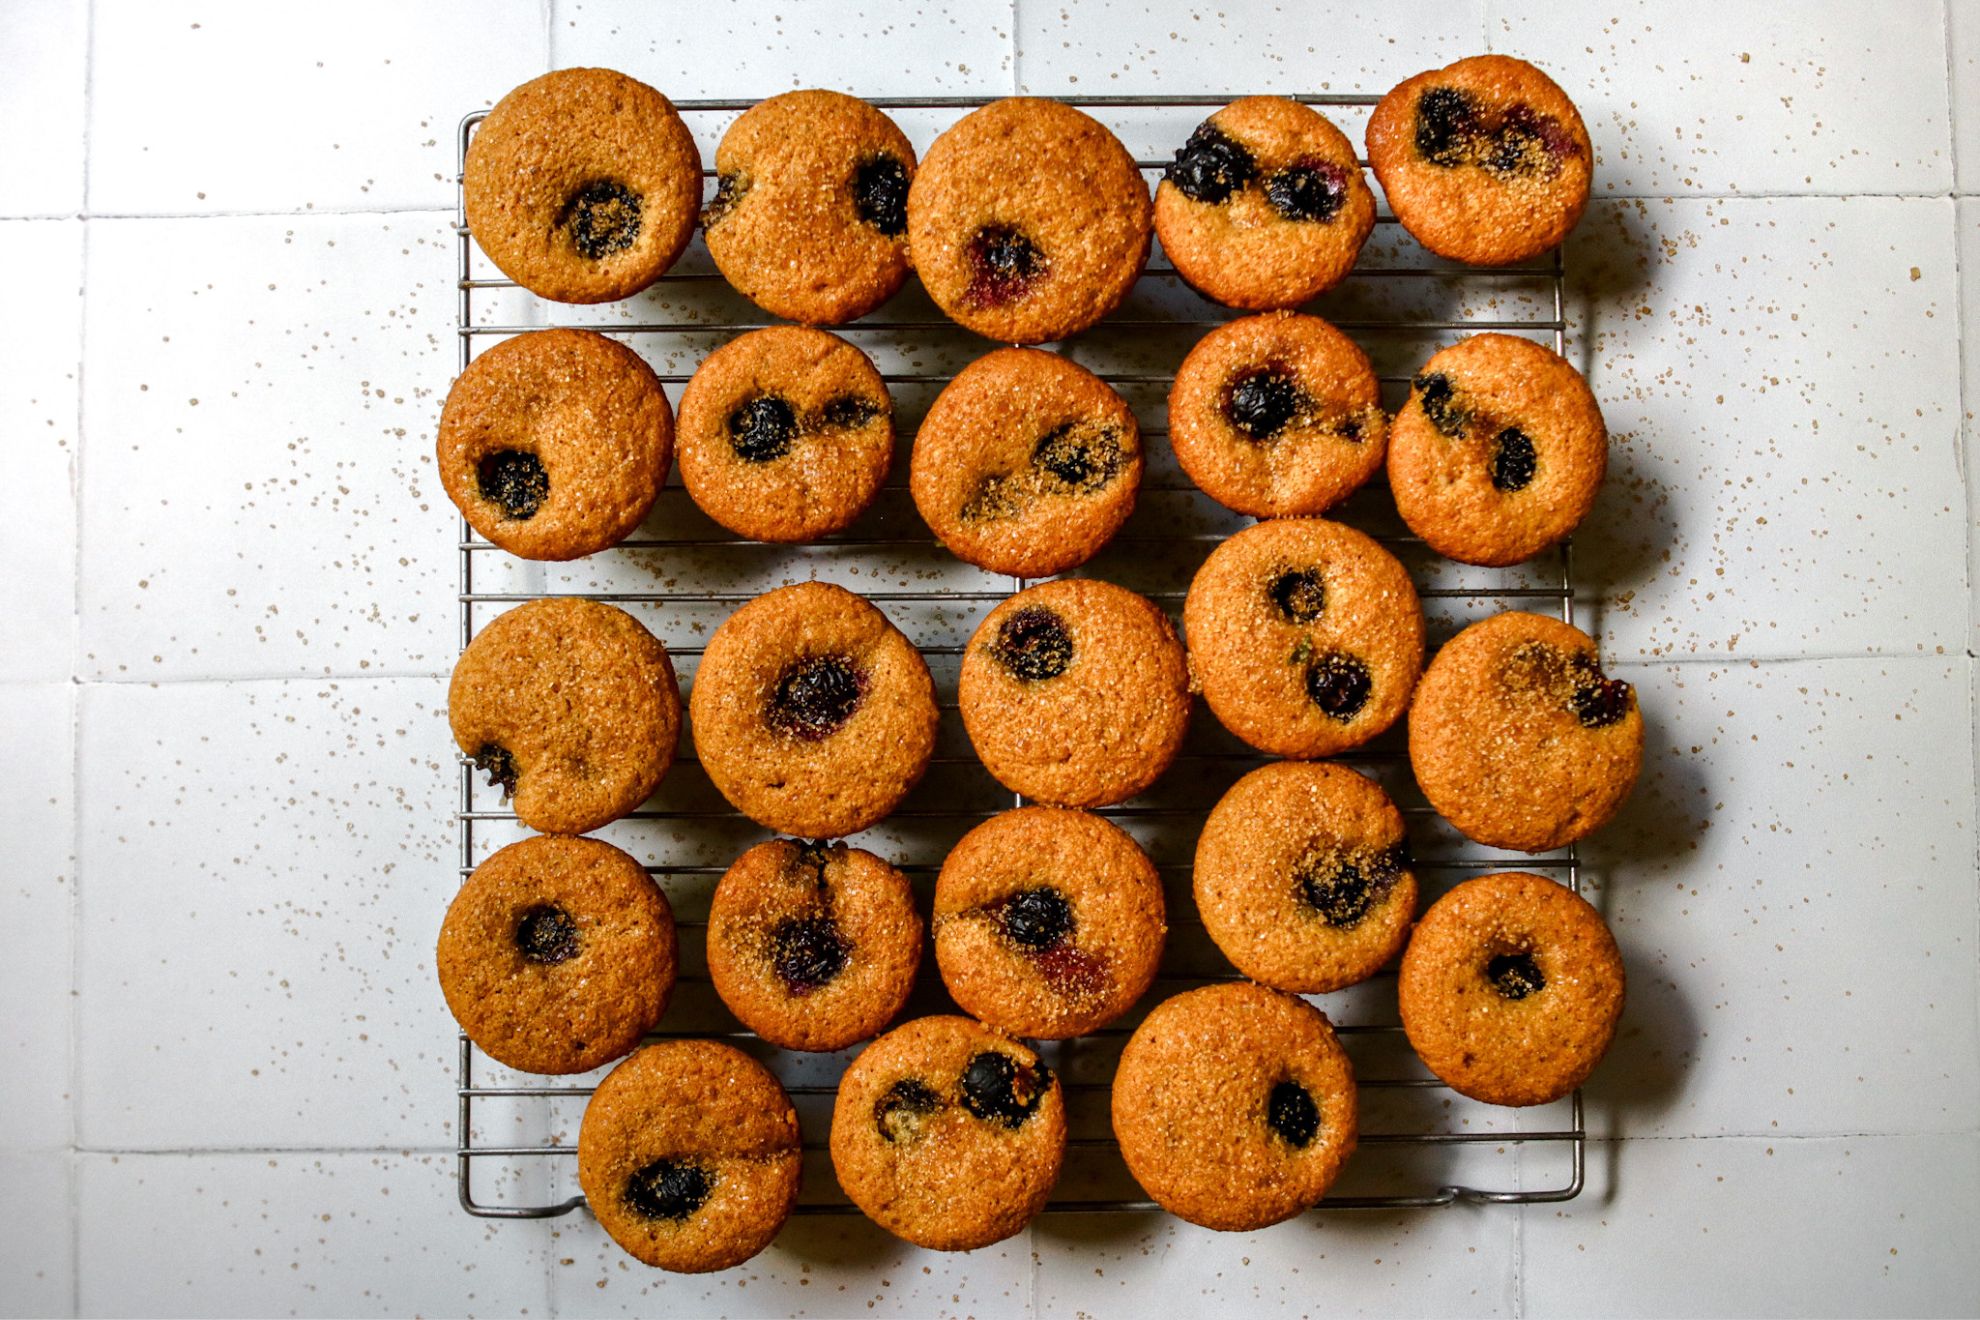 This is an overhead horizontal image of small muffins on a silver cooling rack. The image shows the entire wire rack on a white tiled surface. The muffins are studded with one or two blueberries and sprinkled with turbinado sugar. Some sugar has fallen down onto the white surface.